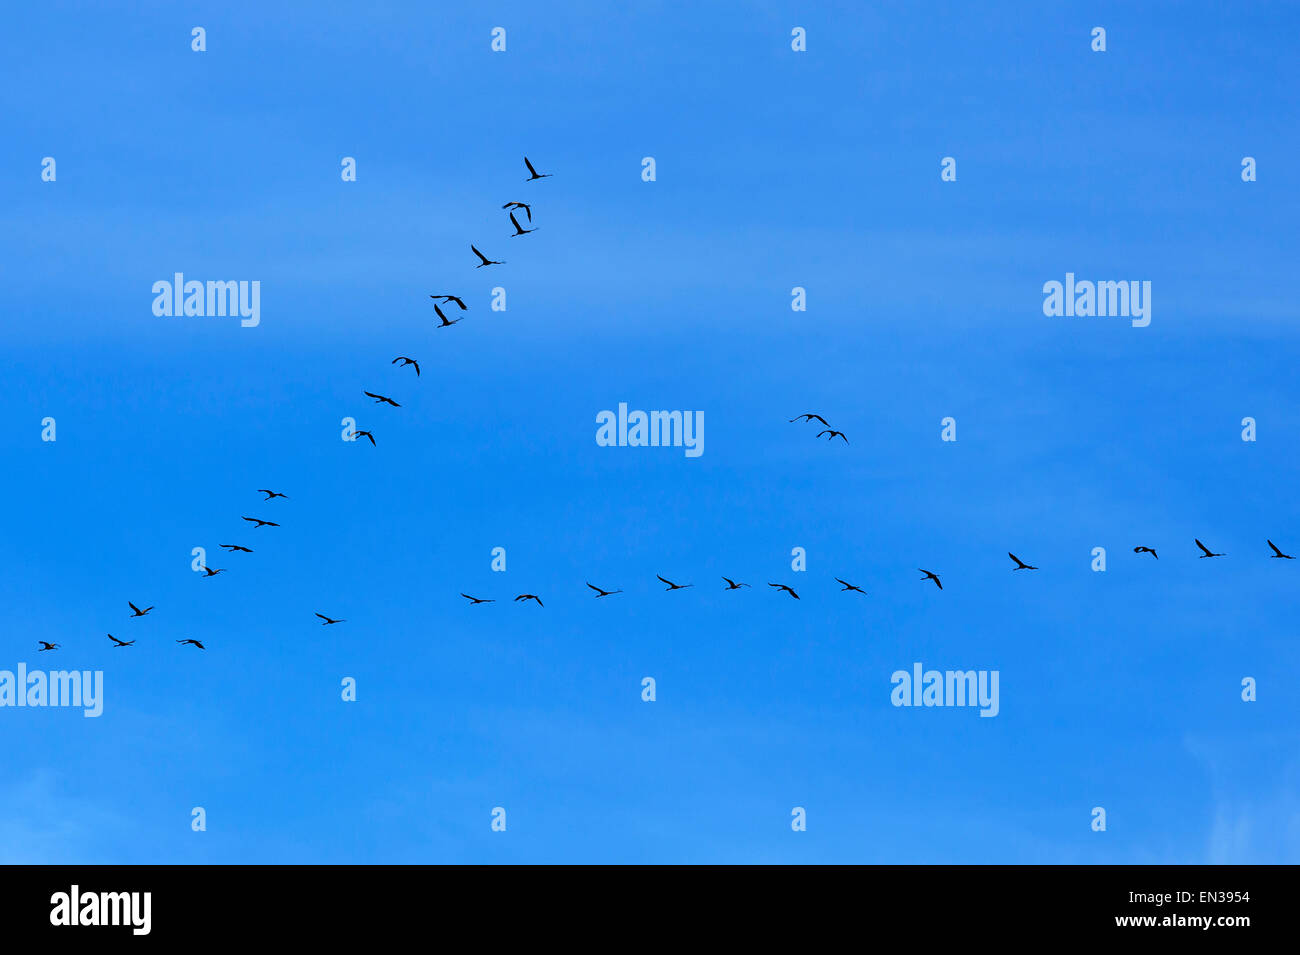 Common Cranes (Grus grus) flying in formation in the blue sky, Mecklenburg-Western Pomerania, Germany Stock Photo